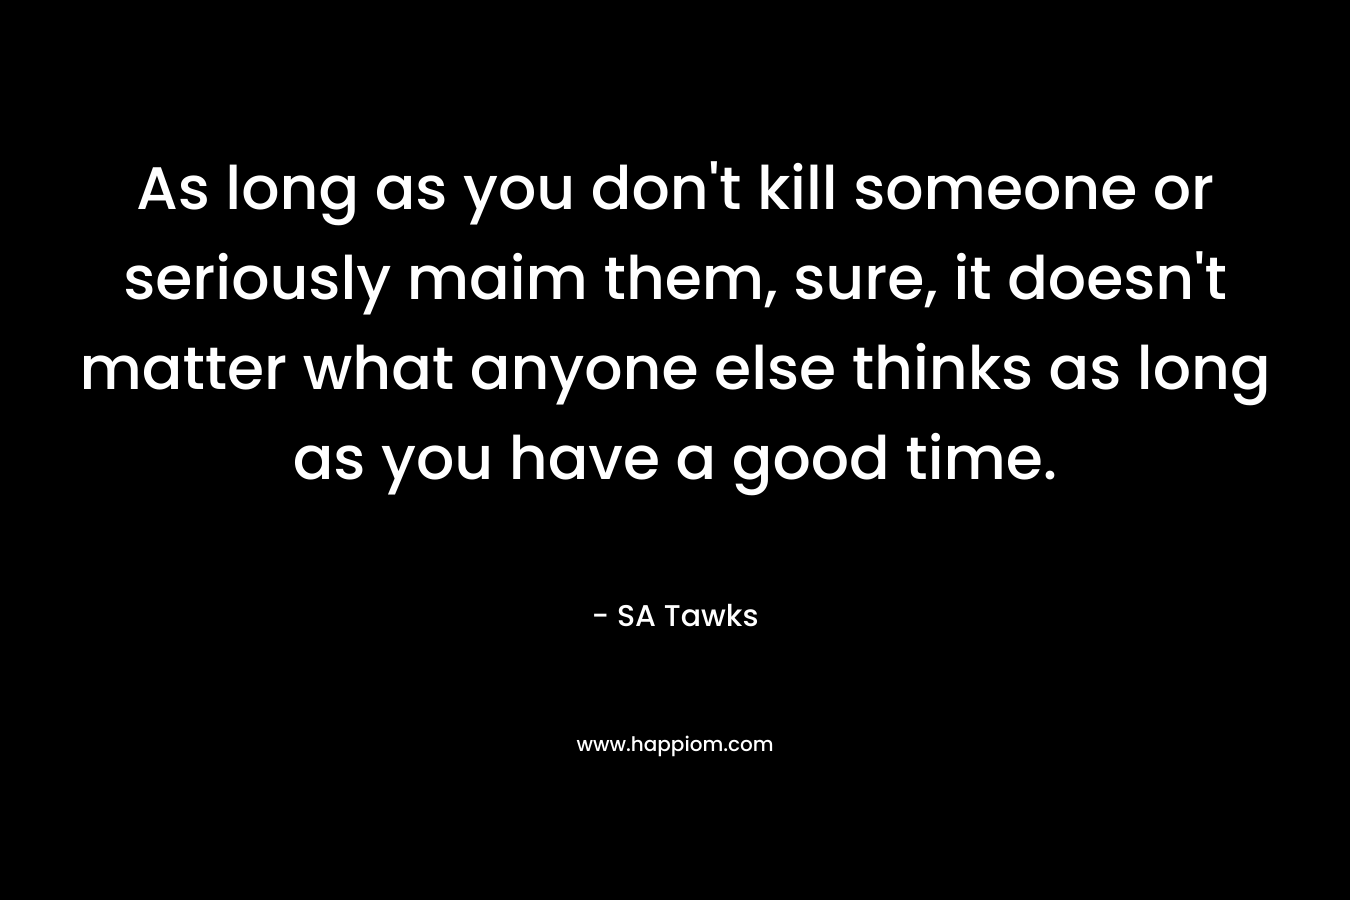 As long as you don't kill someone or seriously maim them, sure, it doesn't matter what anyone else thinks as long as you have a good time.